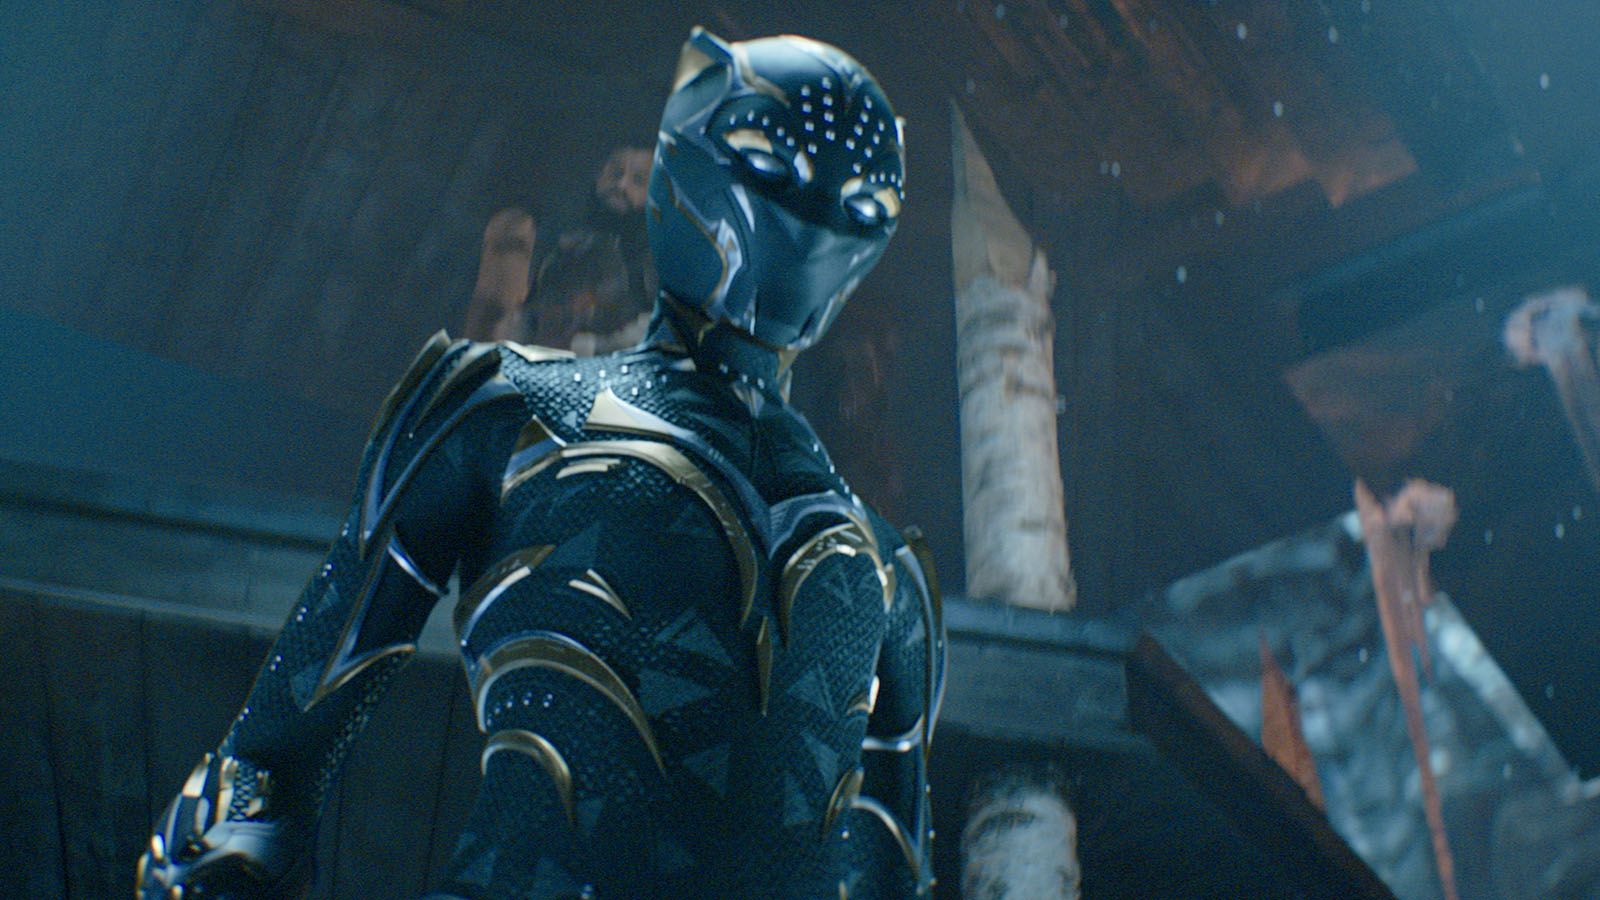 "Black Panther: Wakanda Forever" held onto its No. 1 spot at the box office last weekend.